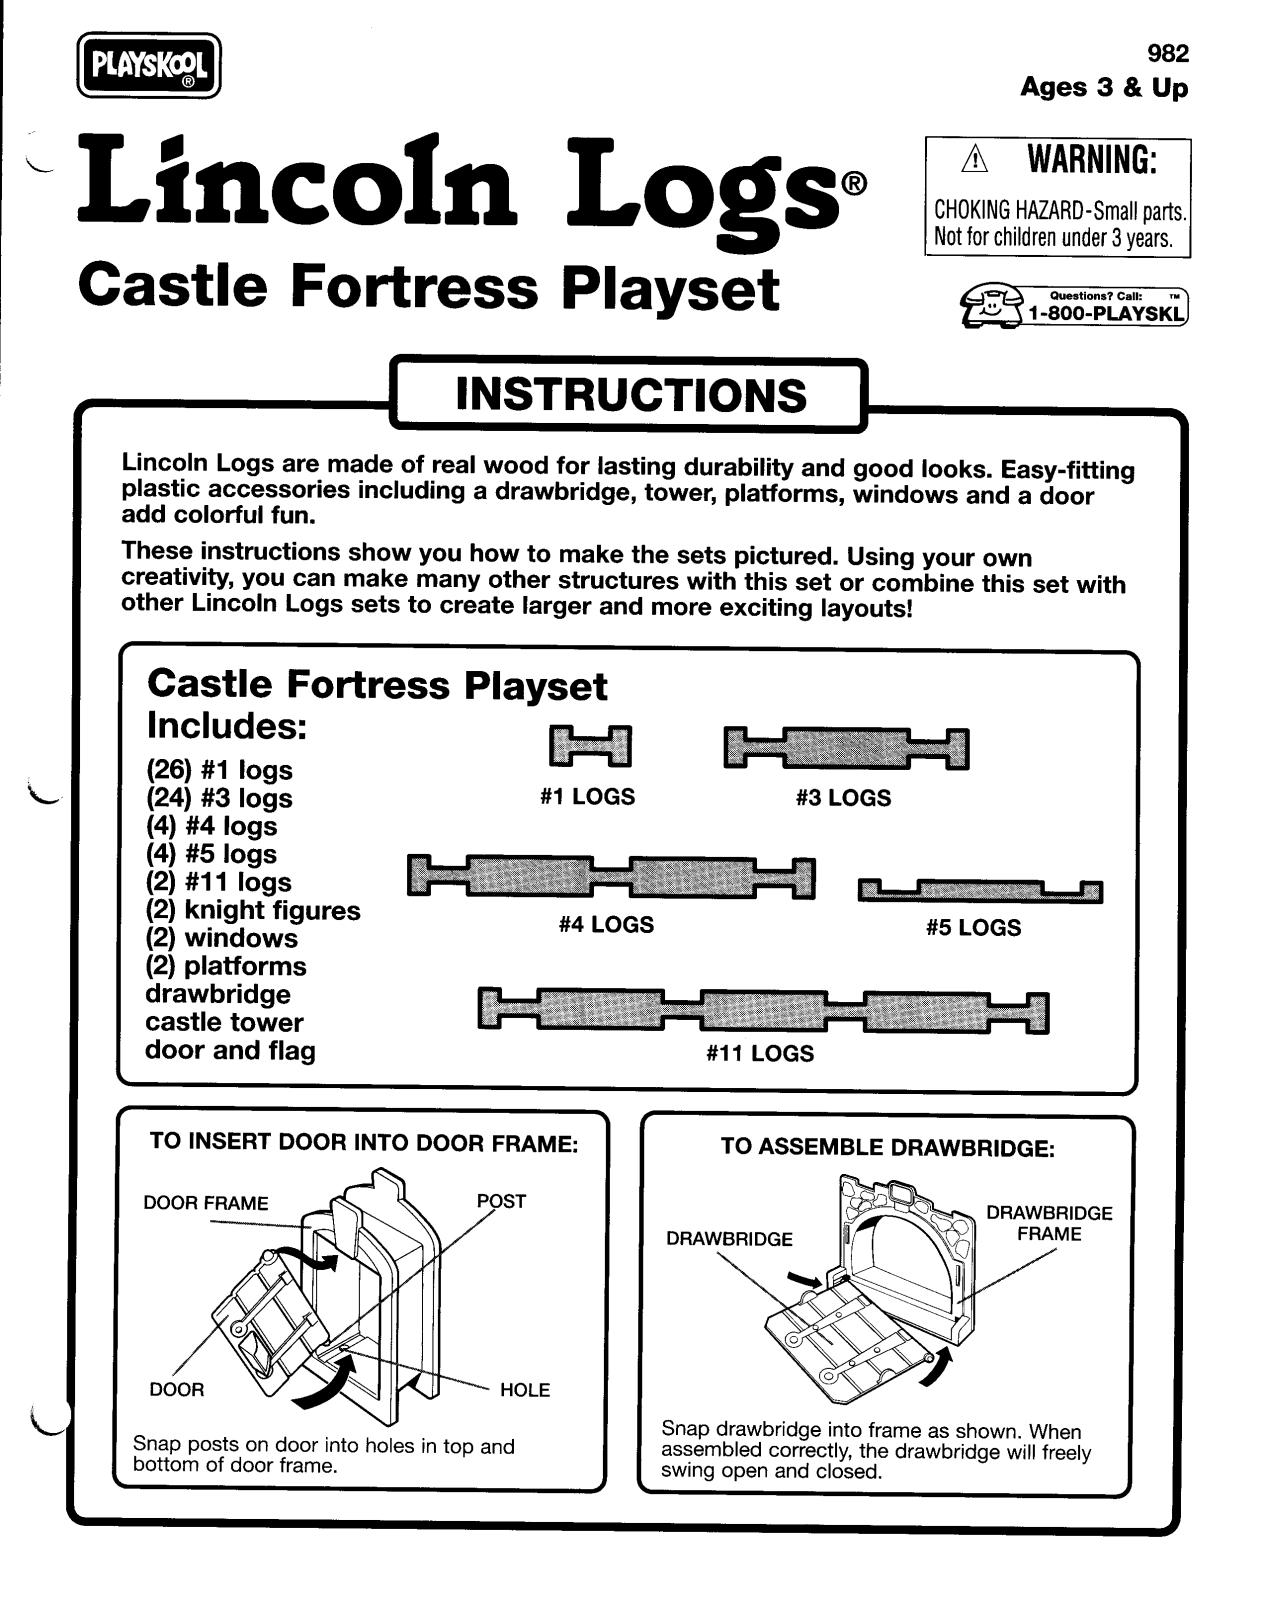 Hasbro LINCOLN LOGS CASTLE FORTRESS PLAYSET Manual